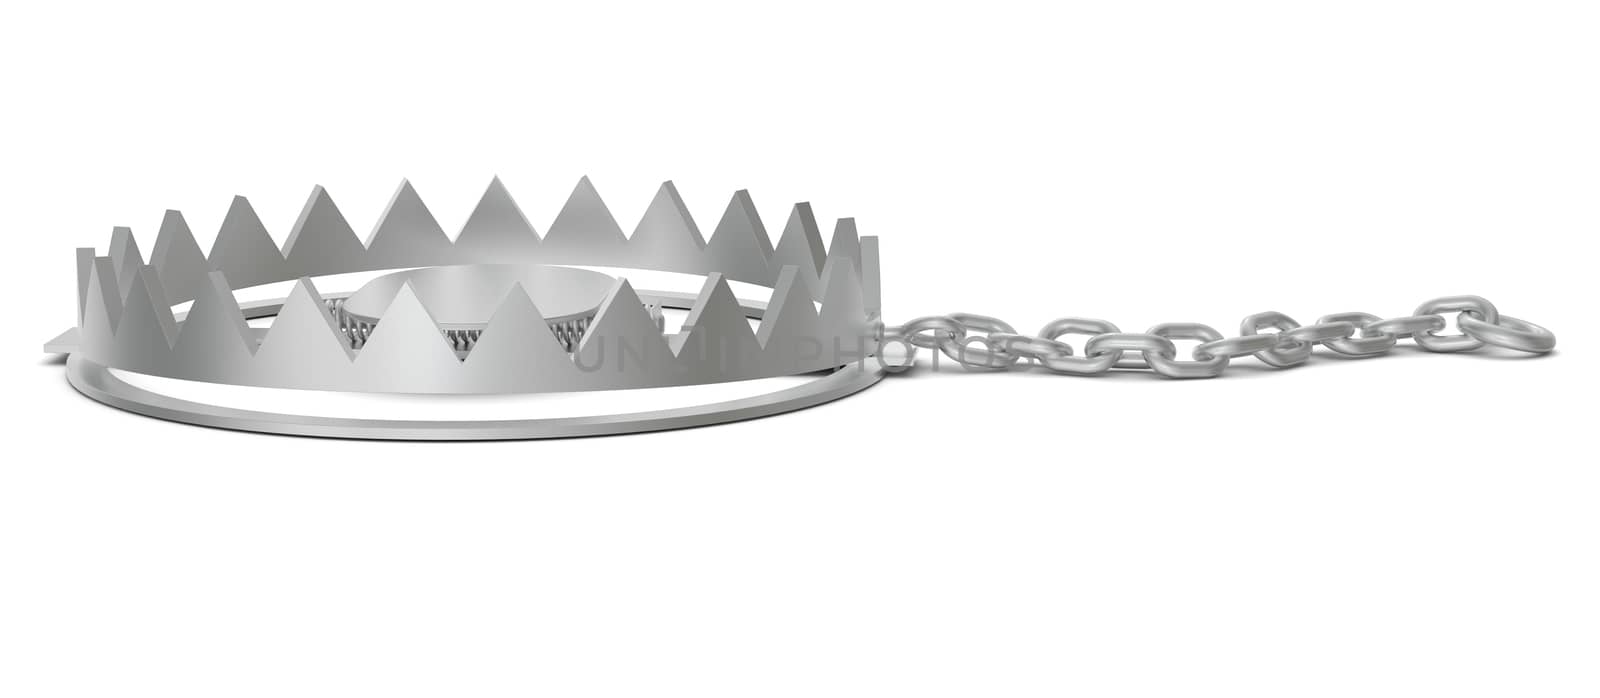 Bear trap with chain on isolated white background, side view